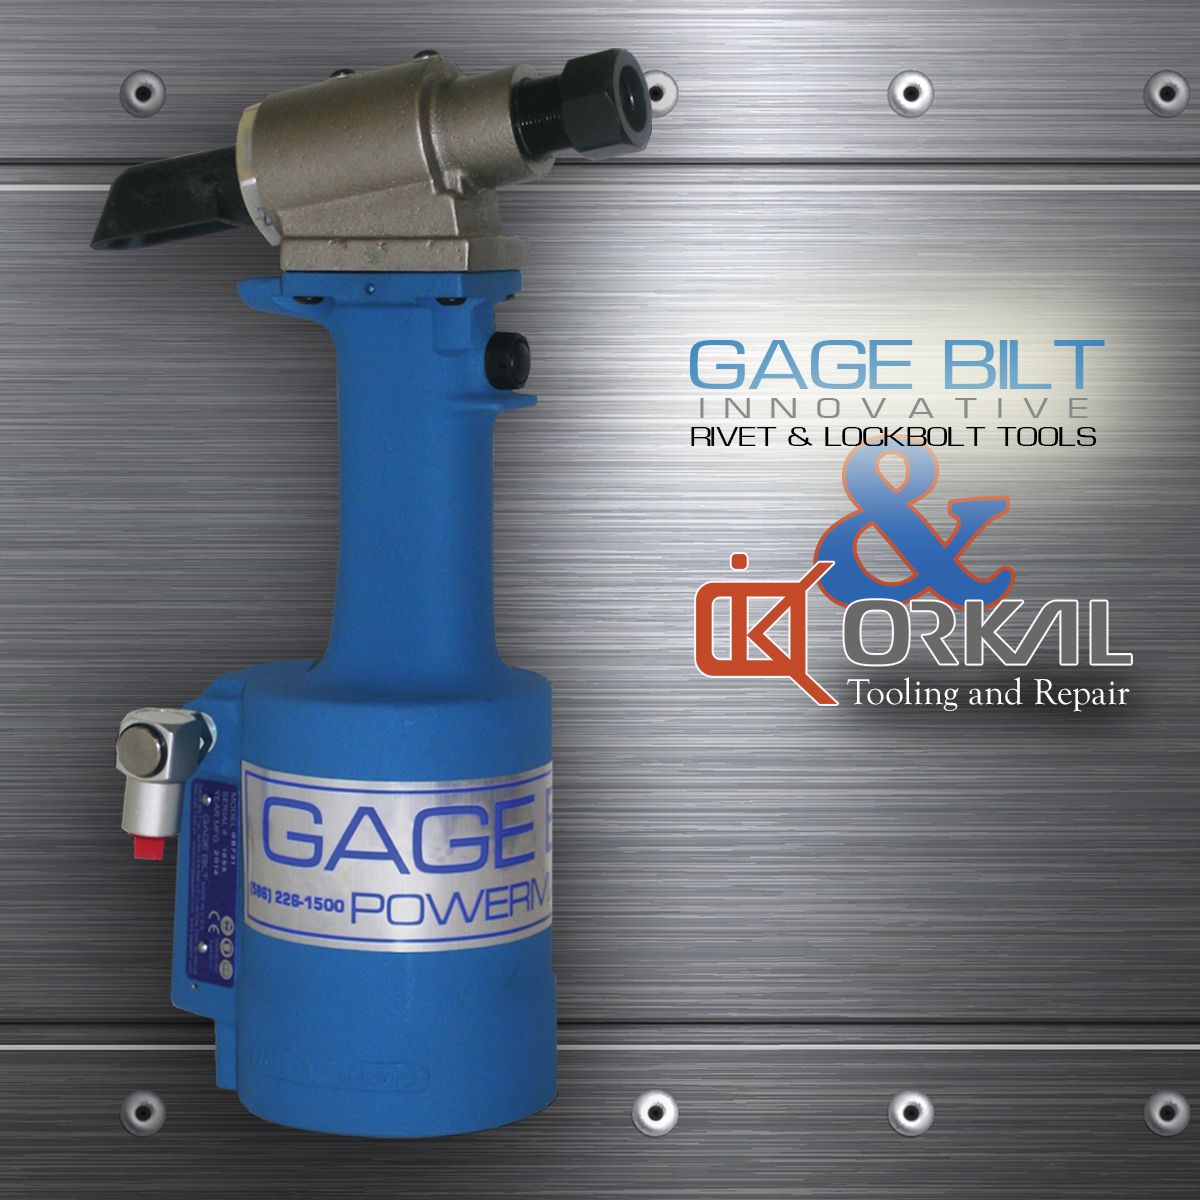 orkal, a gage bilt rivet gun by orkal industries, showcasing their aerospace assembly solutions and aircraft-grade tooling excellence.